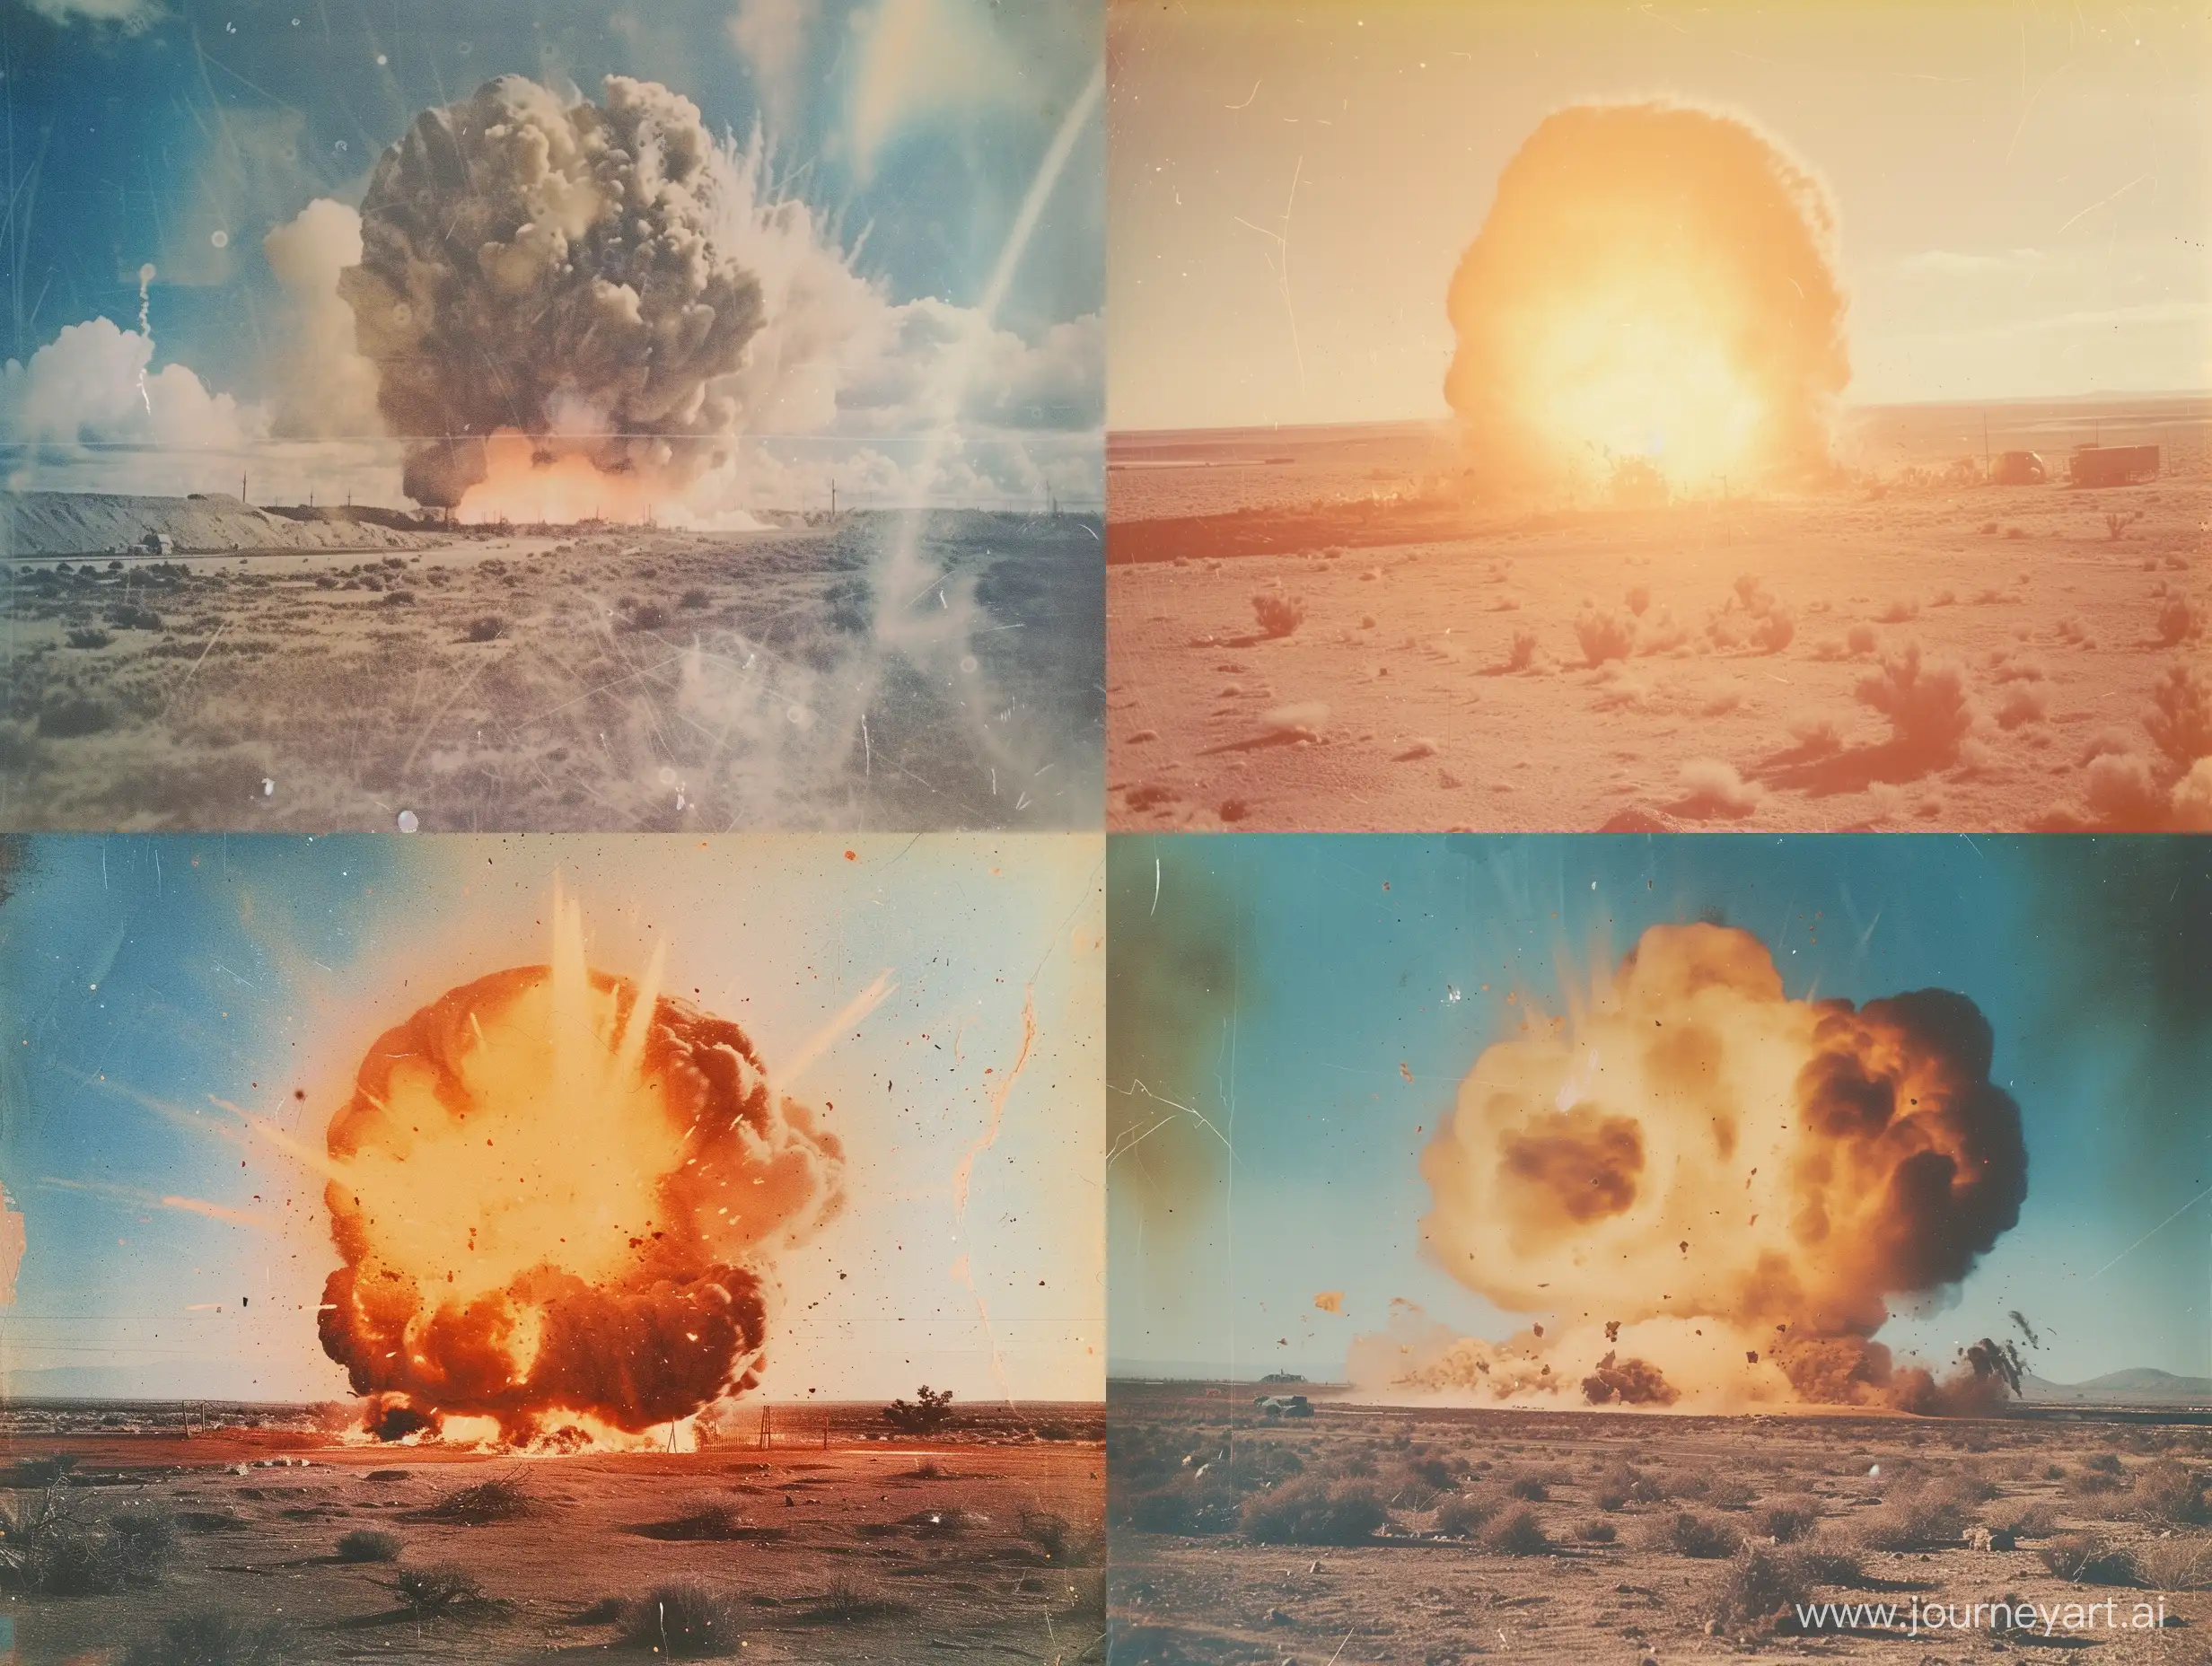 Documentary-Photo-Nuke-Explosion-at-Test-Site-Captured-on-Disposable-Camera